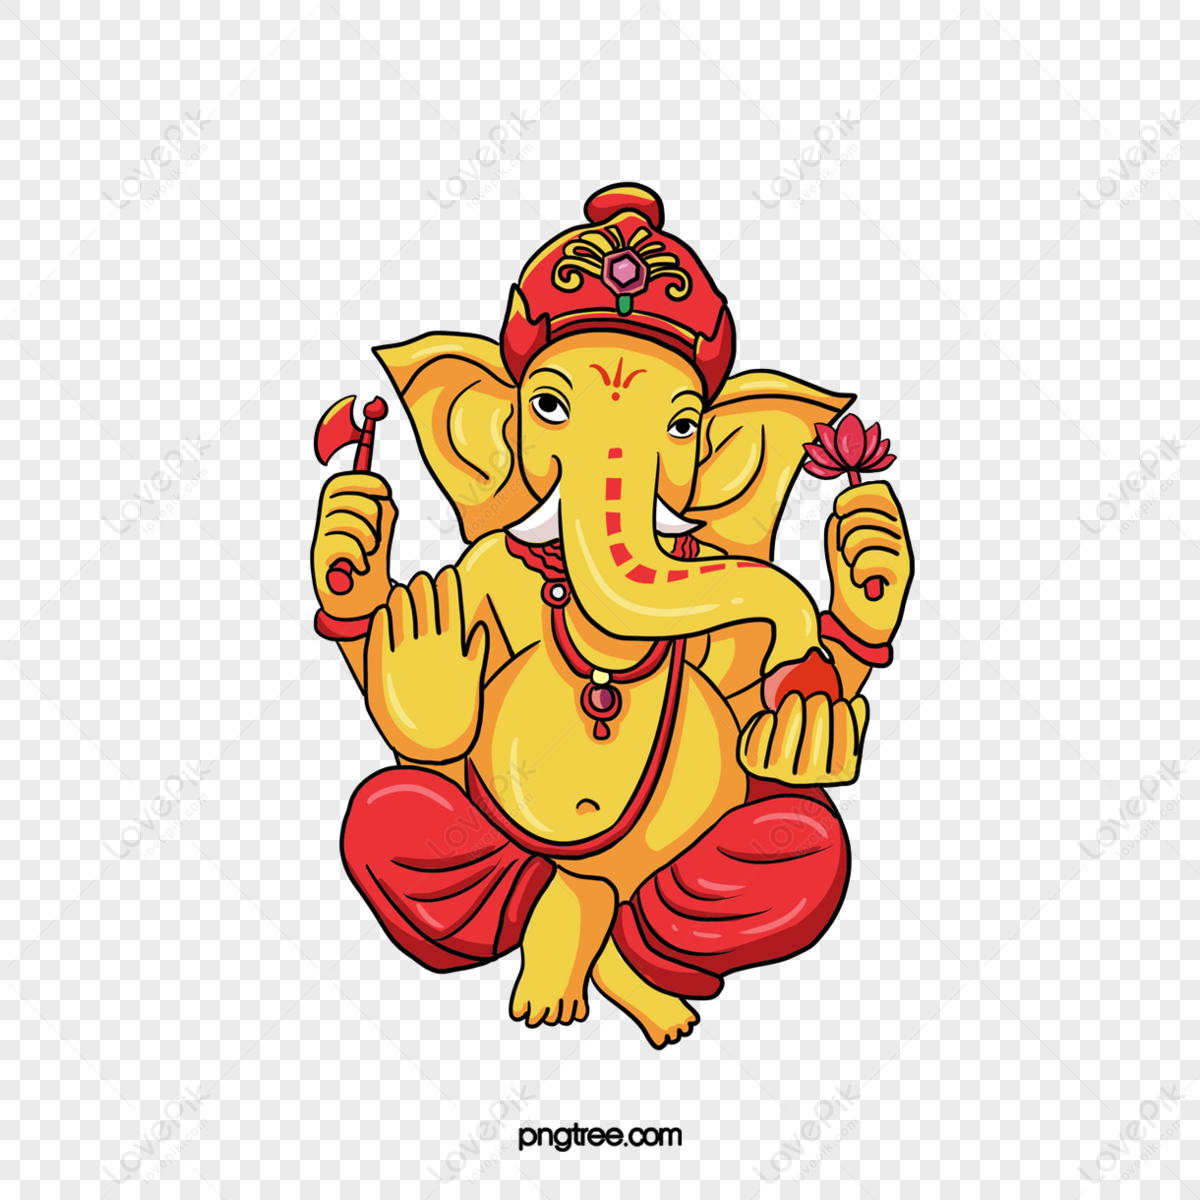 Lord Ganesha Vector PNG Images, Abstract Lord Ganesha Background, Ganesh,  Chaturthi, Abstract PNG Image For Free Download | Creative poster design,  Happy ganesh chaturthi, Creative posters